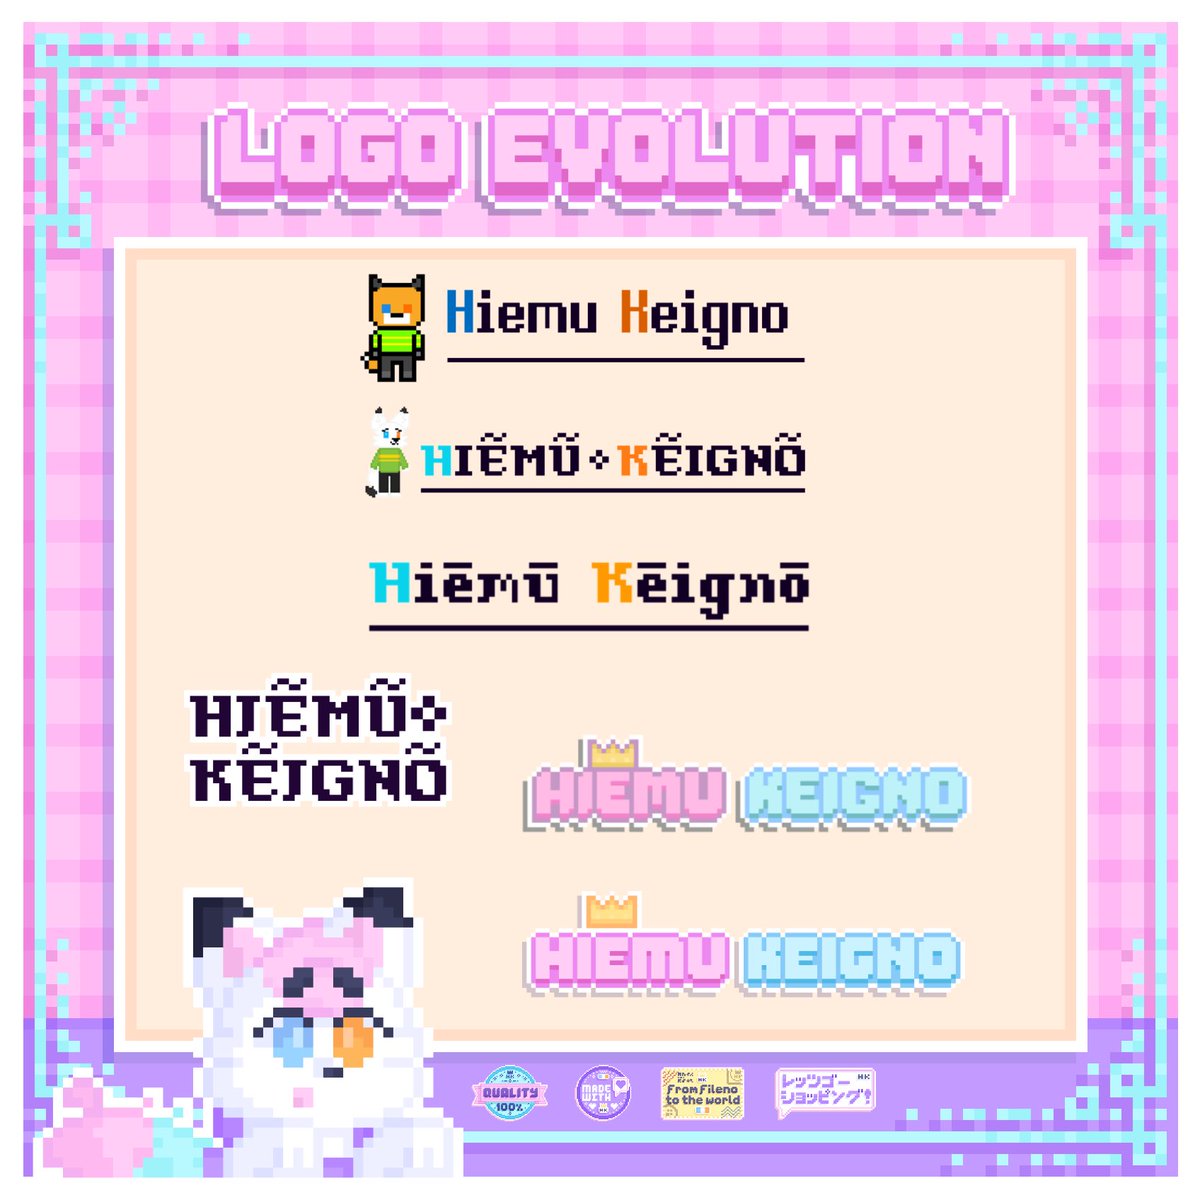 🌸💖 Evolution of my logo since its creation in 2022 :’’DDD 🦊🌈

Thank y’all very much for allowing me to continue here, u always motivate me to improve my work, definitely for me it’s da best job in da world, thamk chu! 🫂💖

#pixelart #ドット絵 #ケモノ #イラスト #illustration